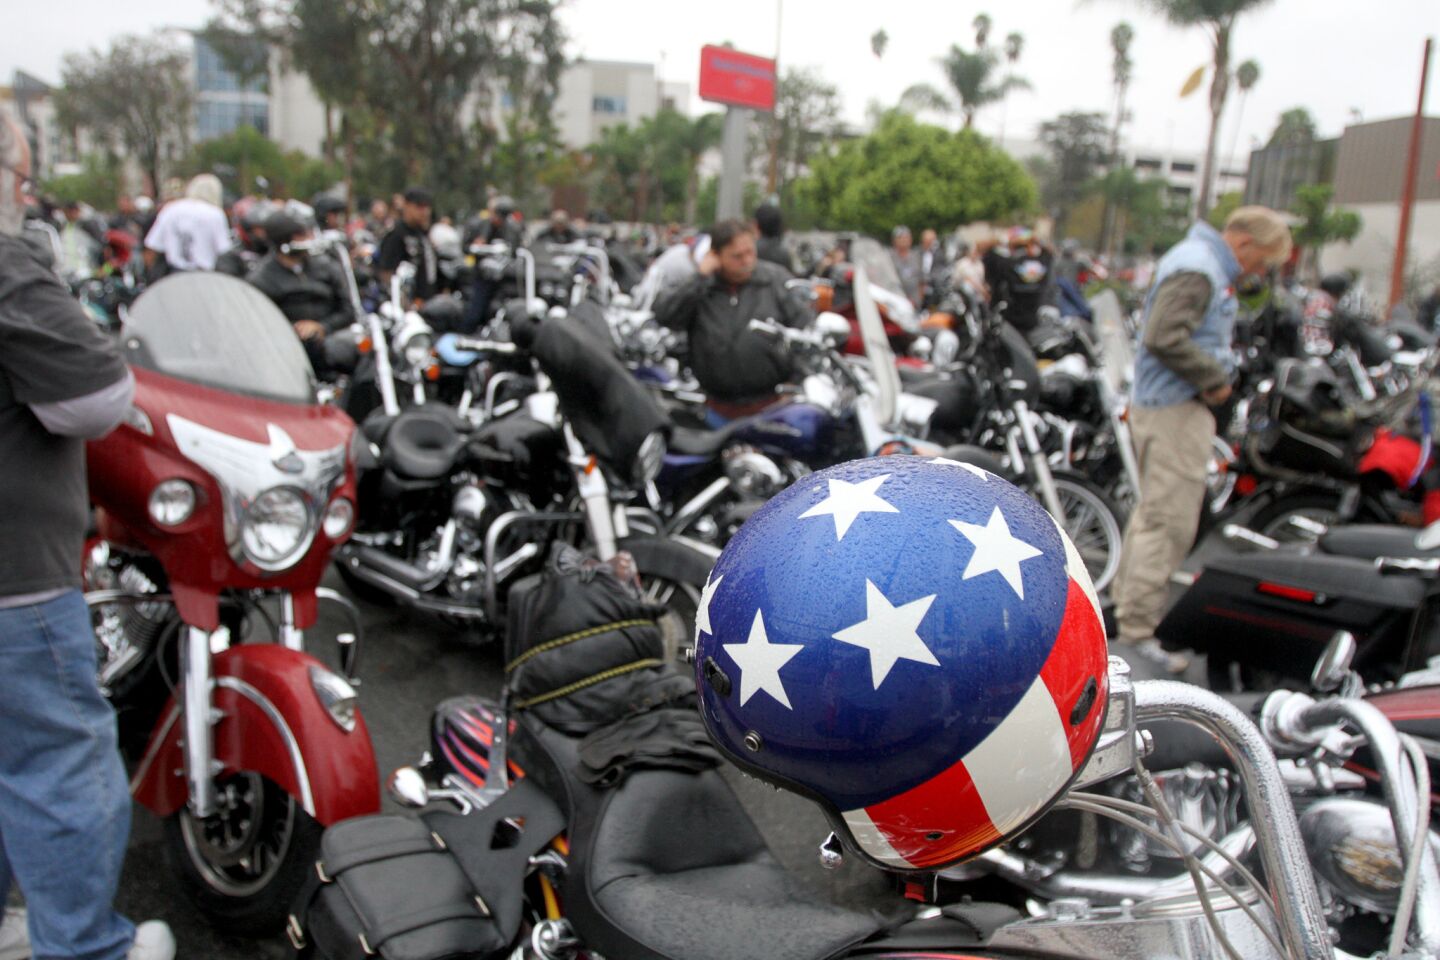 A patriotic helmet rests on a motorcycle prior to the start of the 32nd annual Love Ride at Harley-Davidson Motorcycles in Glendale on Sunday, October 18, 2015. This will be the last fundraising Love Ride.